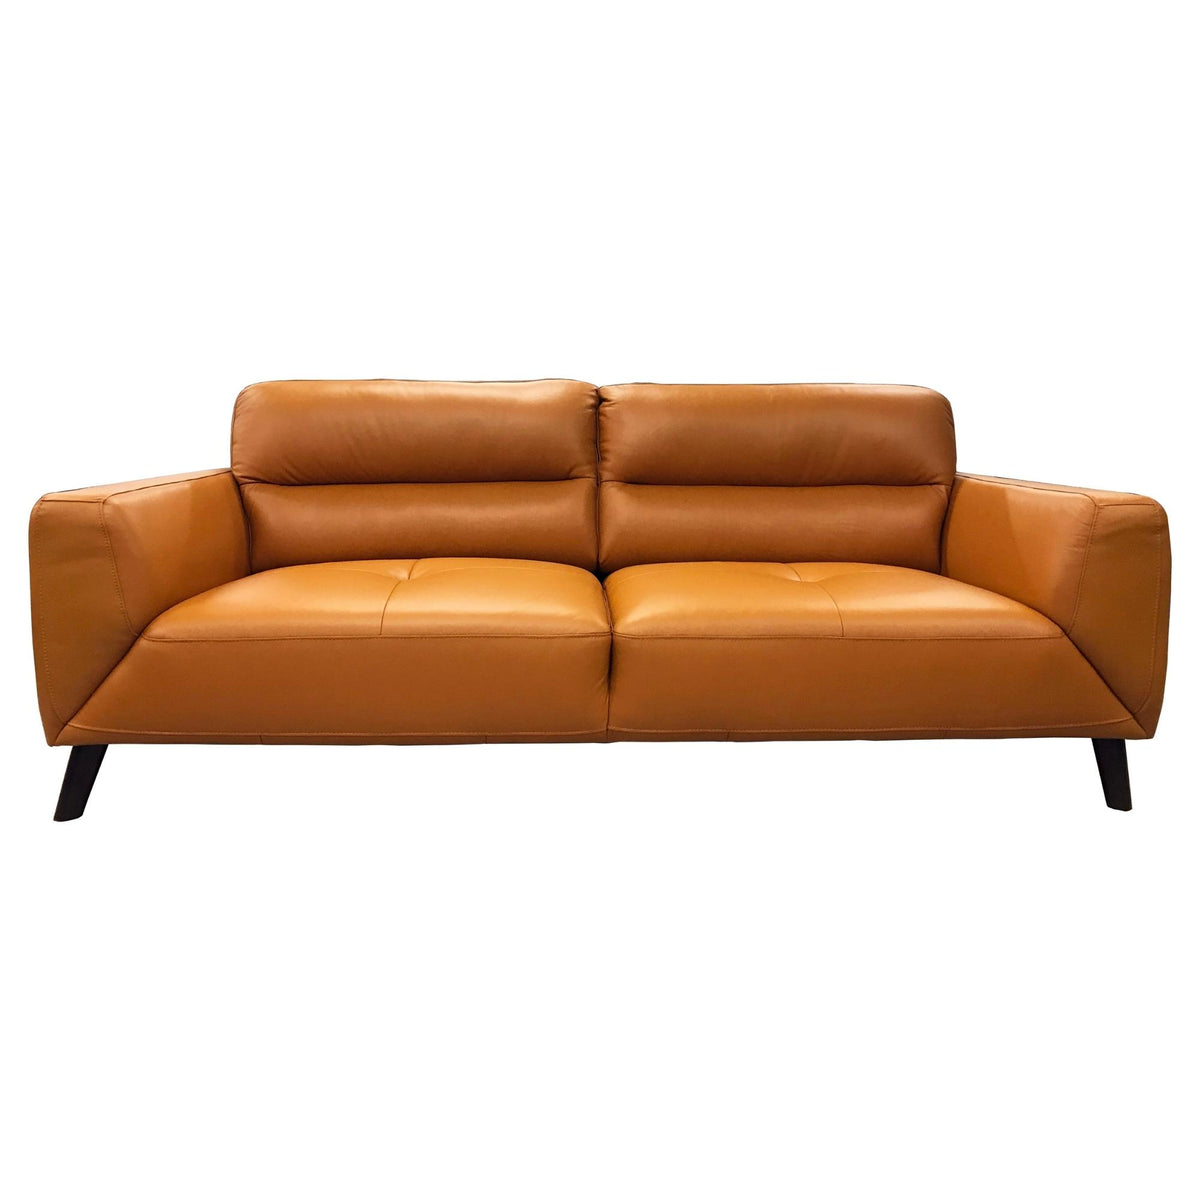 Lenora Genuine Leather Sofa 3 Seater Upholstered Lounge Couch - Tangerine - Notbrand